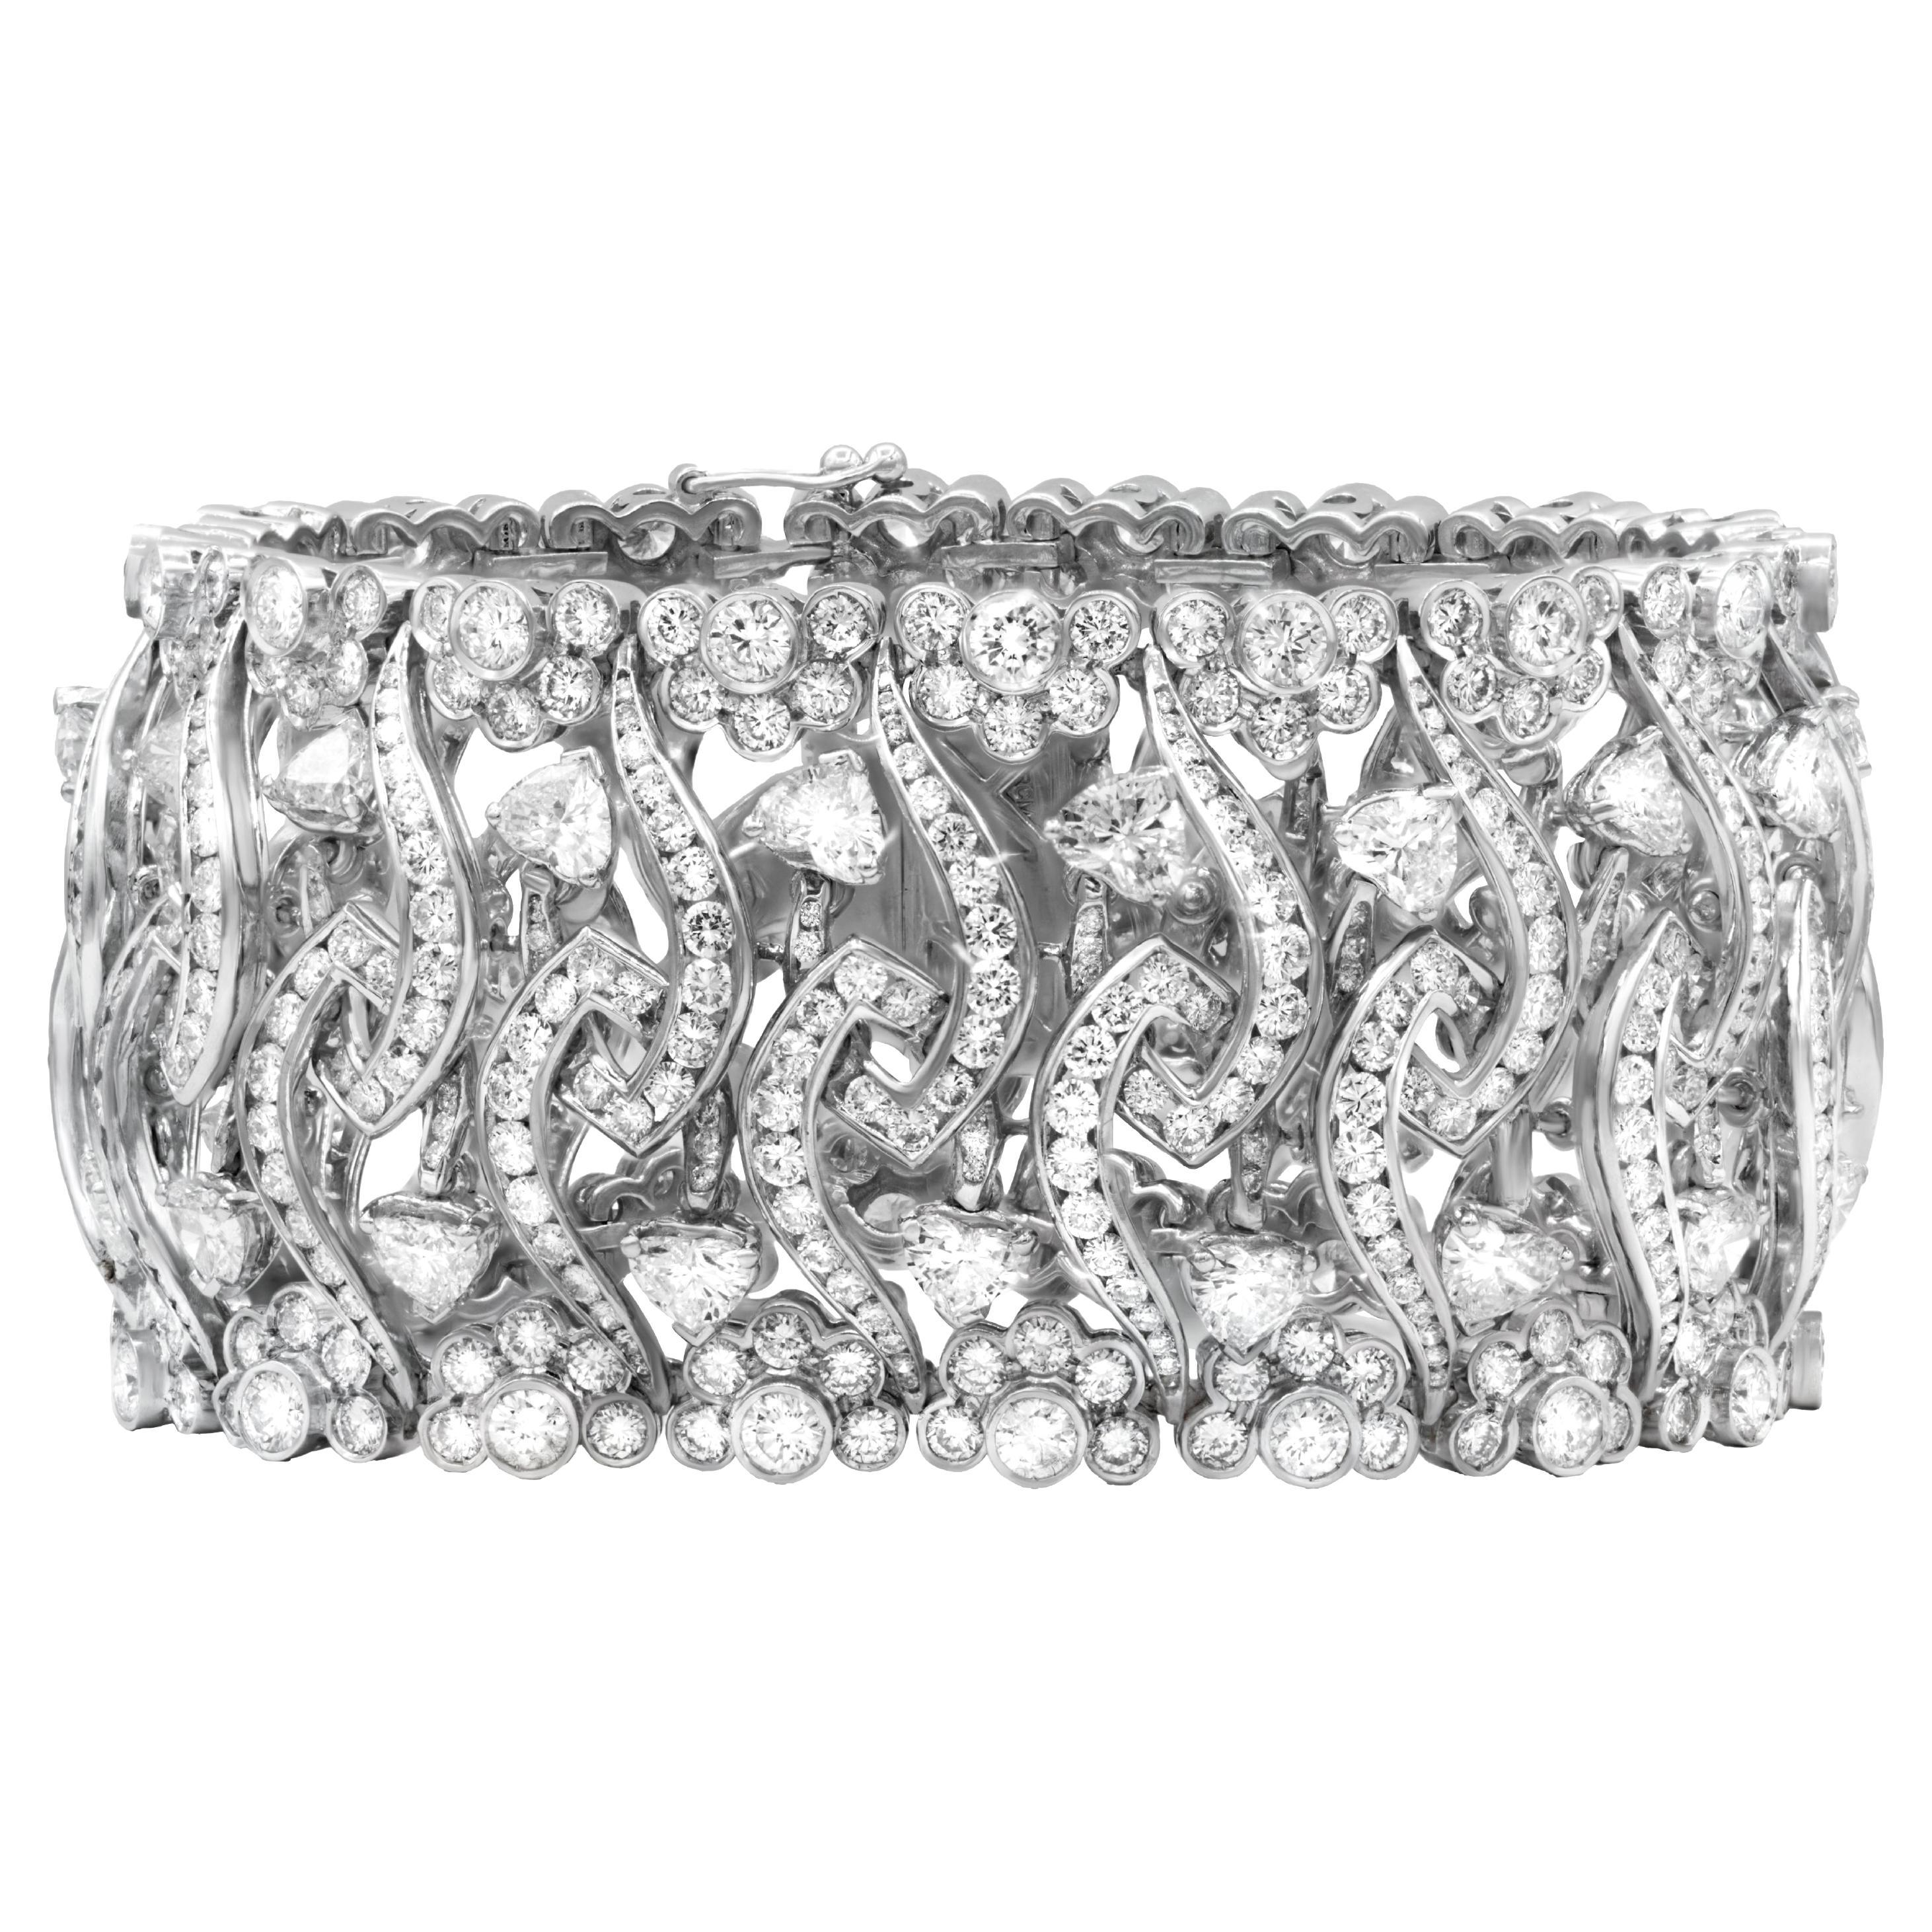 Diana M. 18kt white gold wide, flexible fashion heart bracelet featuring 32.50ct